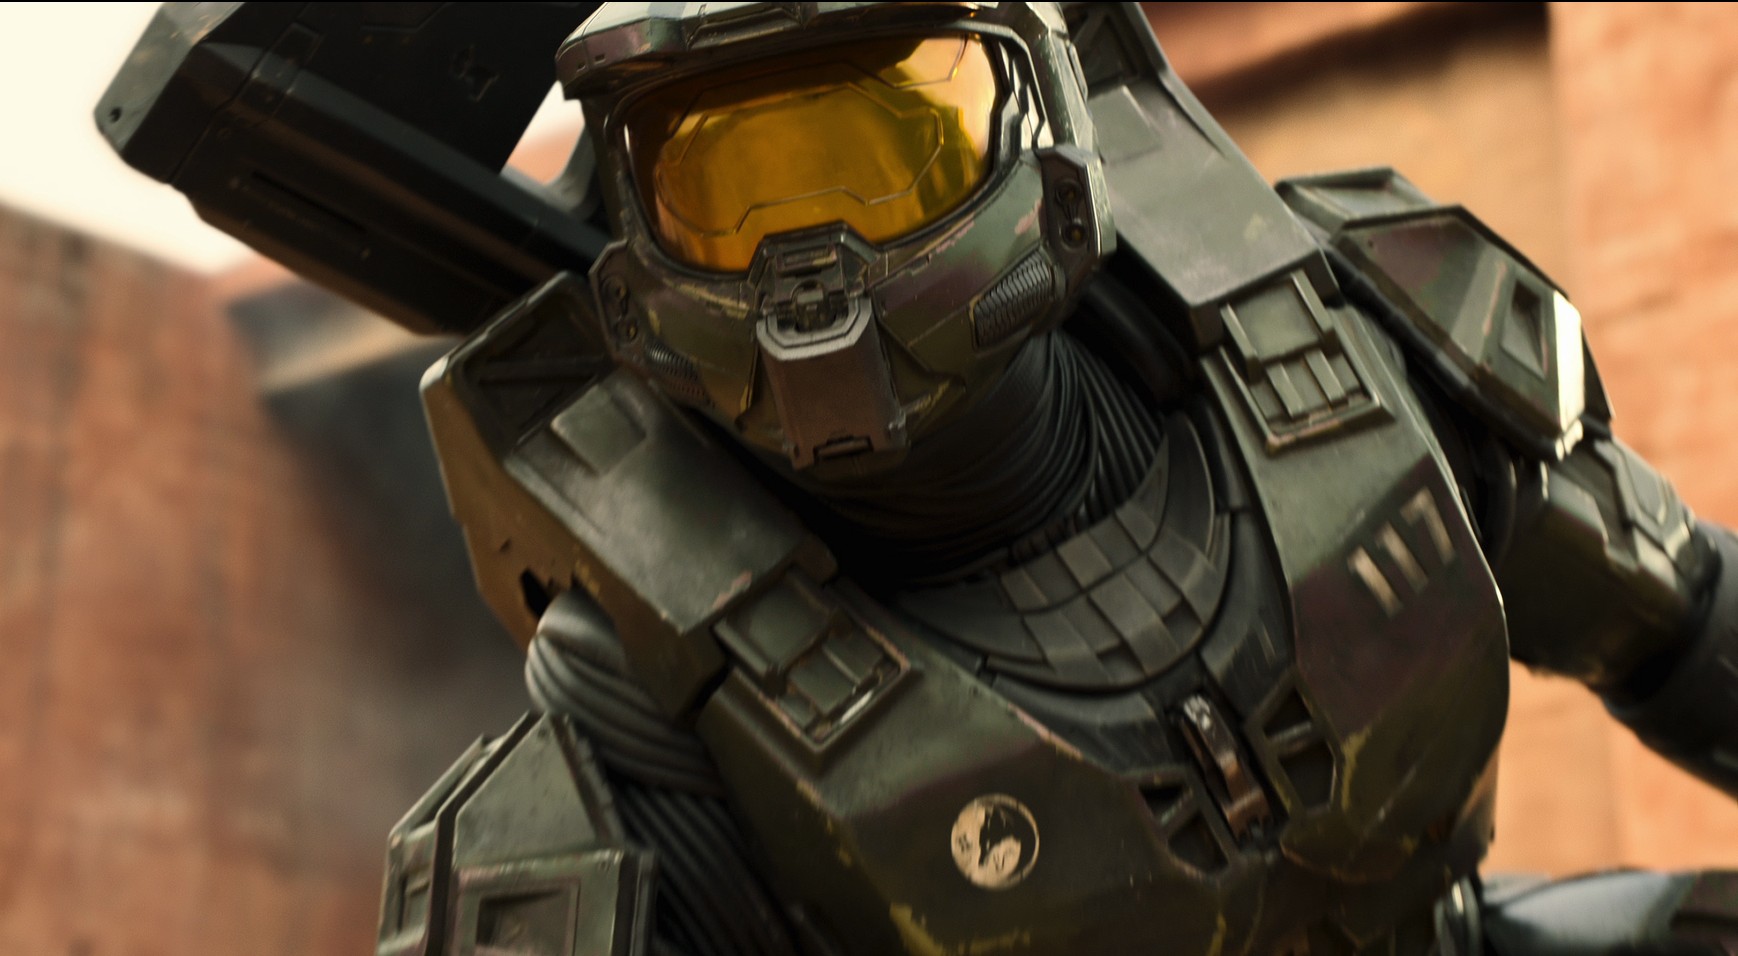 The Halo TV series has finished assembling its cast with John and Miranda  Keyes